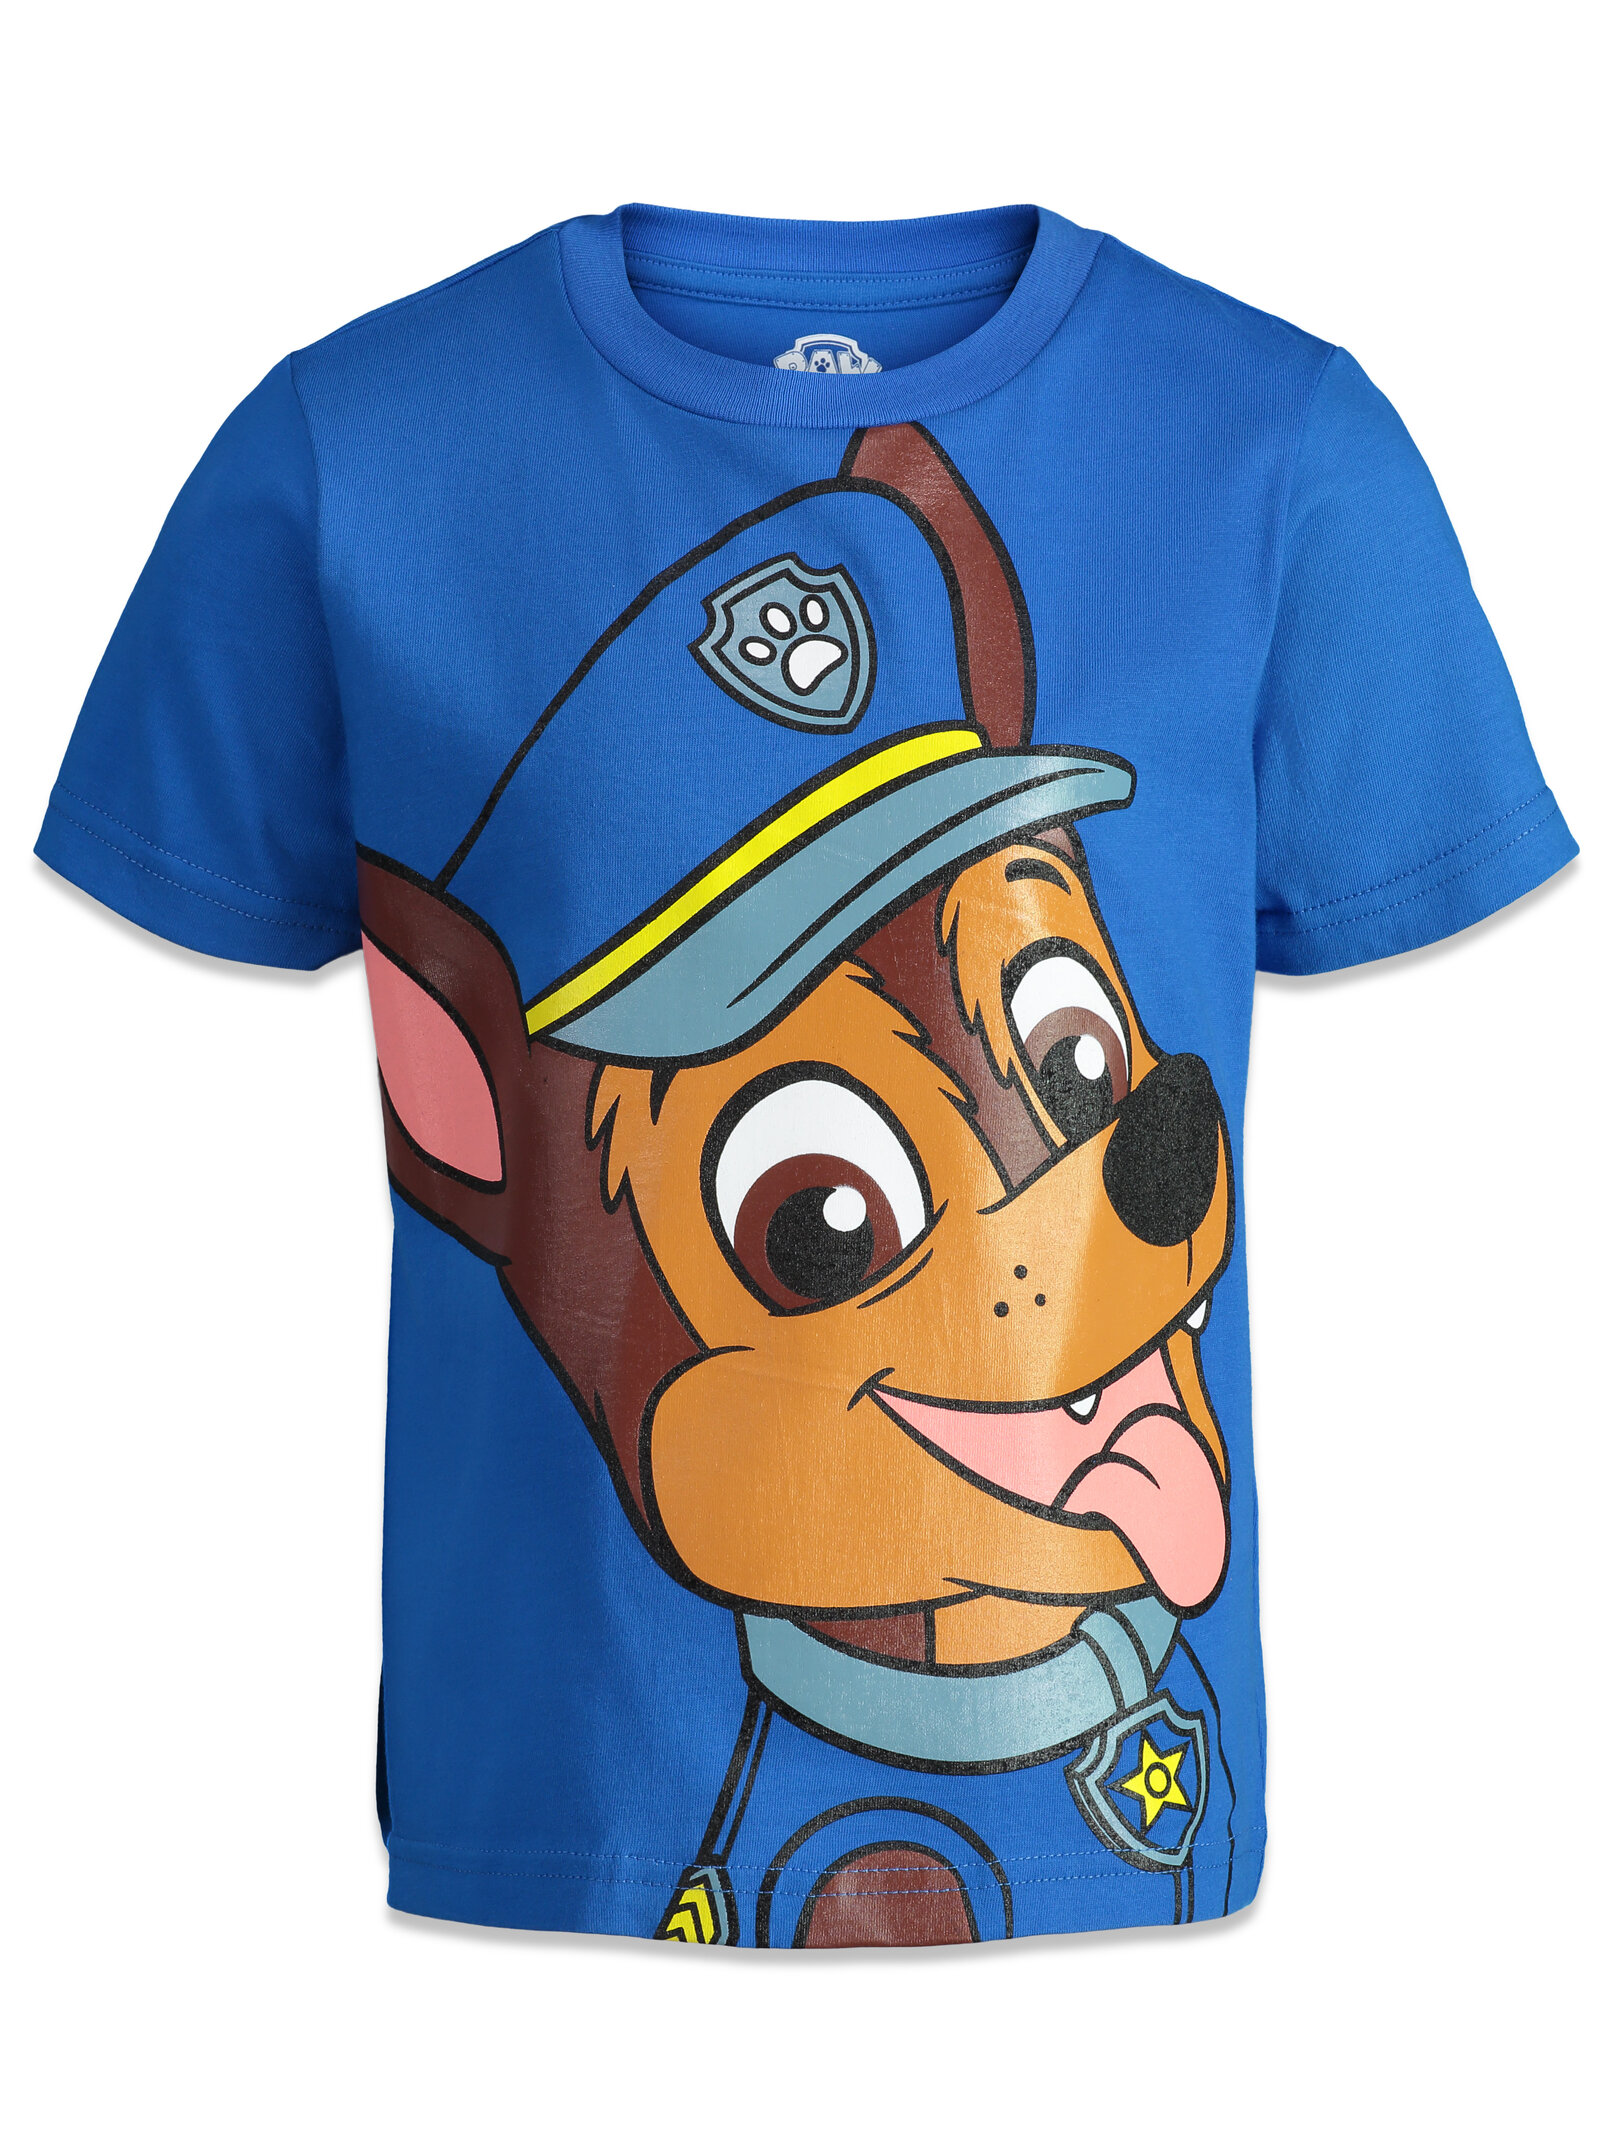 Paw Patrol Toddler Boys 4 Pack Graphic T-Shirt Chase Marshall Rubble ...